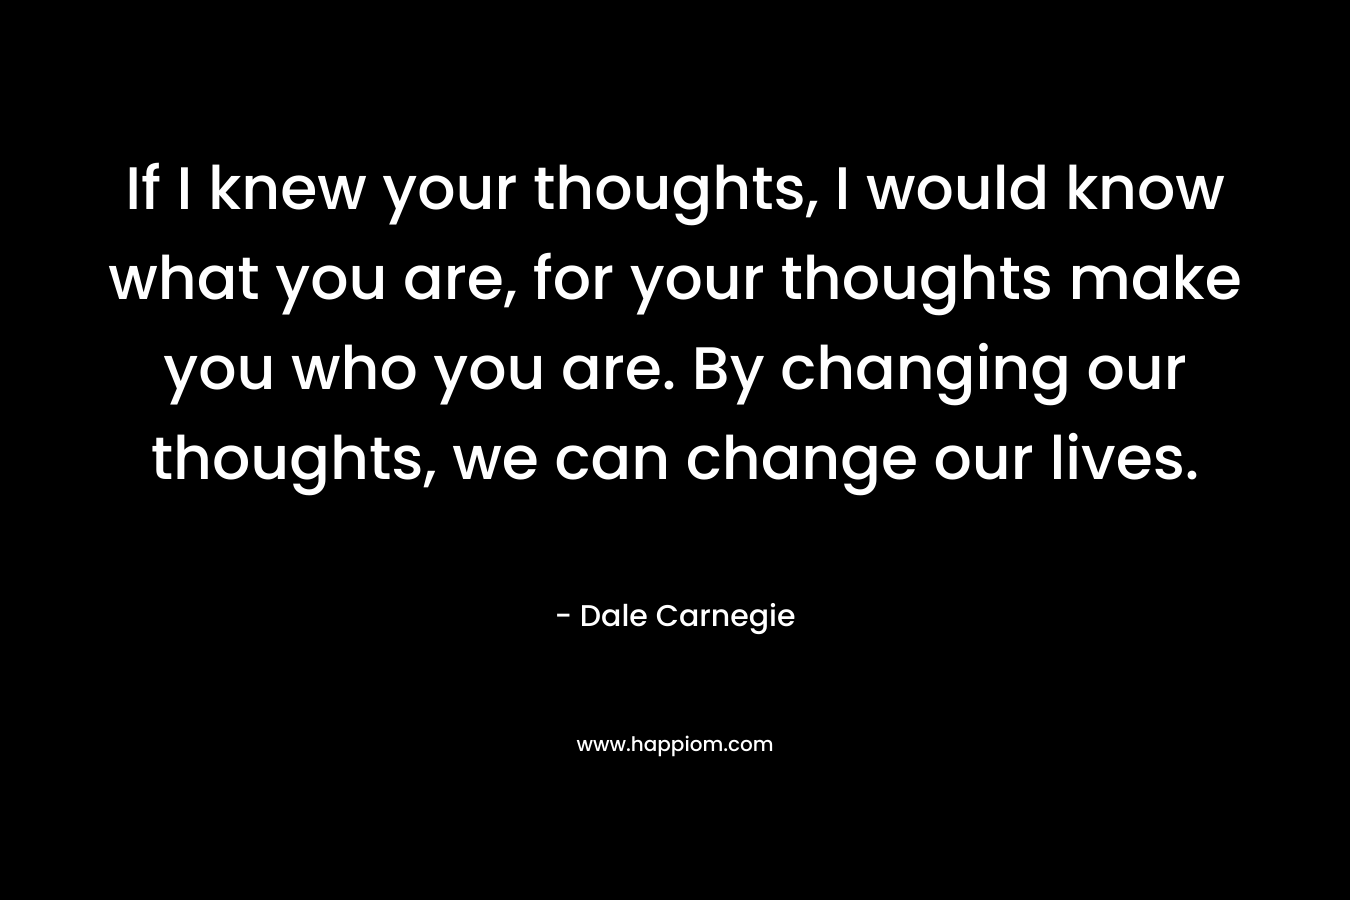 If I knew your thoughts, I would know what you are, for your thoughts make you who you are. By changing our thoughts, we can change our lives.